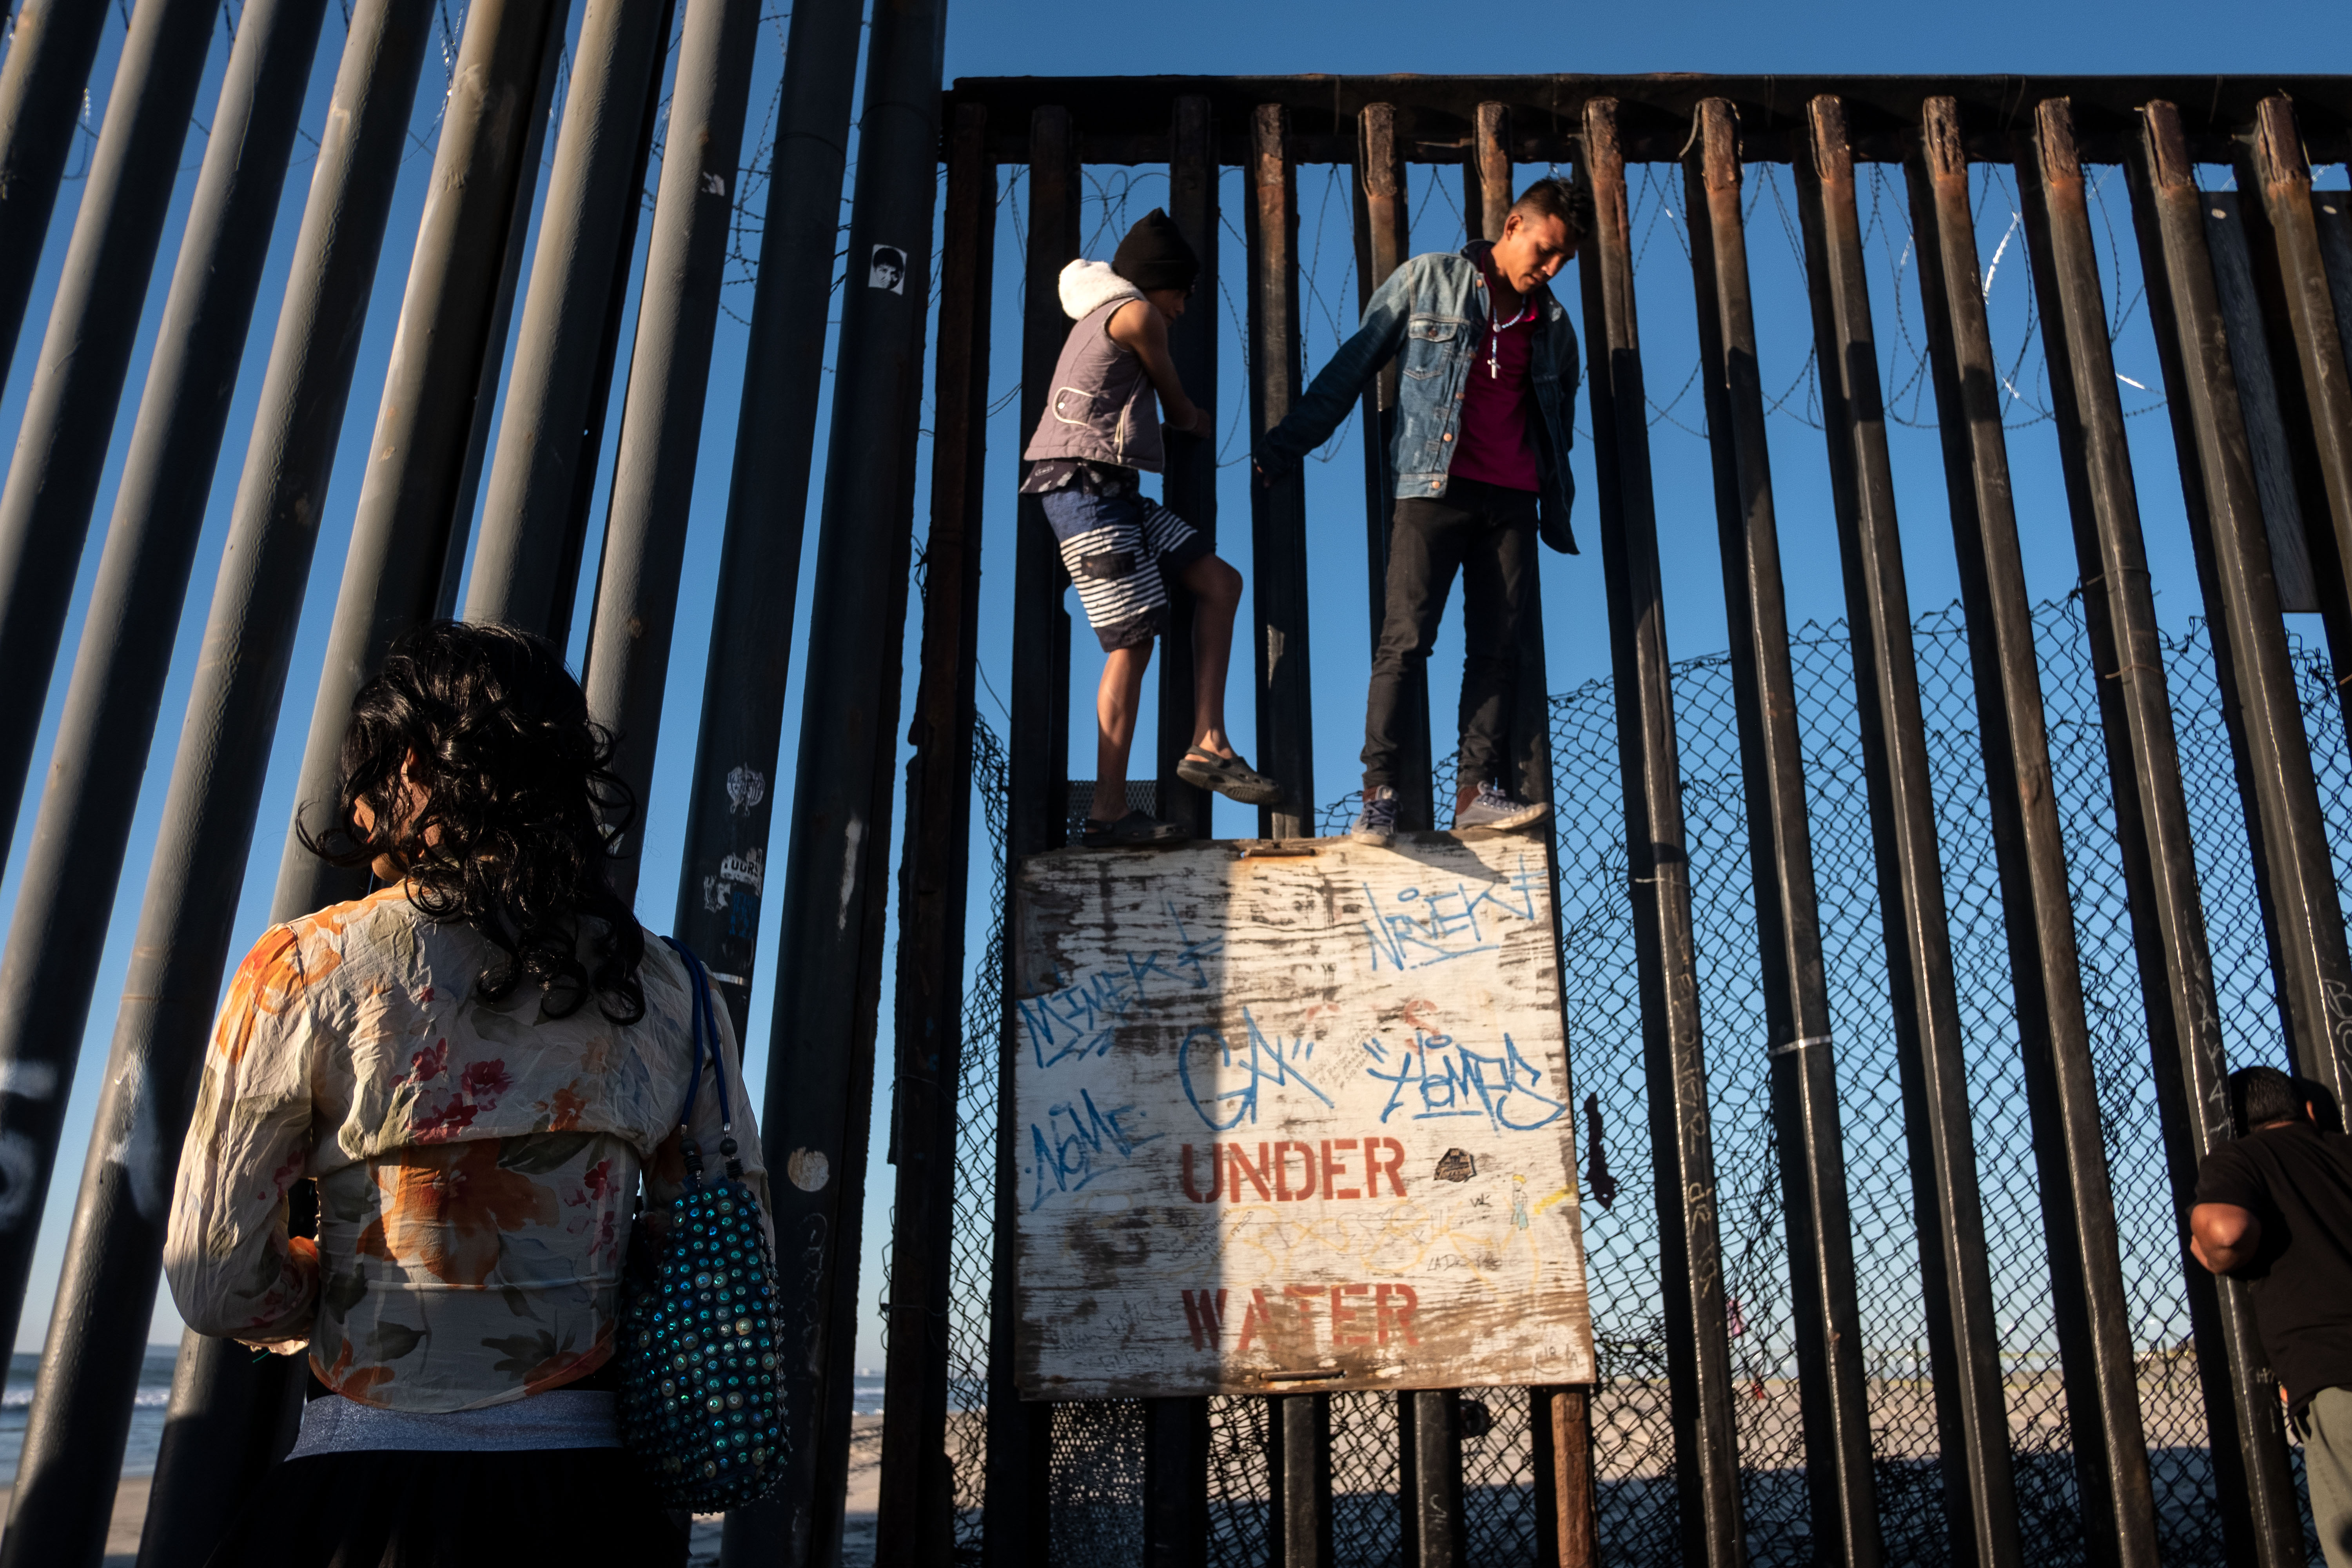 Central American migrants moving towards the United States in hopes of a better life, are seen at the US-Mexico border fence in Playas de Tijuana, Mexico, on November 14, 2018. - US Defence Secretary Jim Mattis said Tuesday he will visit the US-Mexico border, where thousands of active-duty soldiers have been deployed to help border police prepare for the arrival of a "caravan" of migrants. (Photo by Guillermo Arias / AFP) 